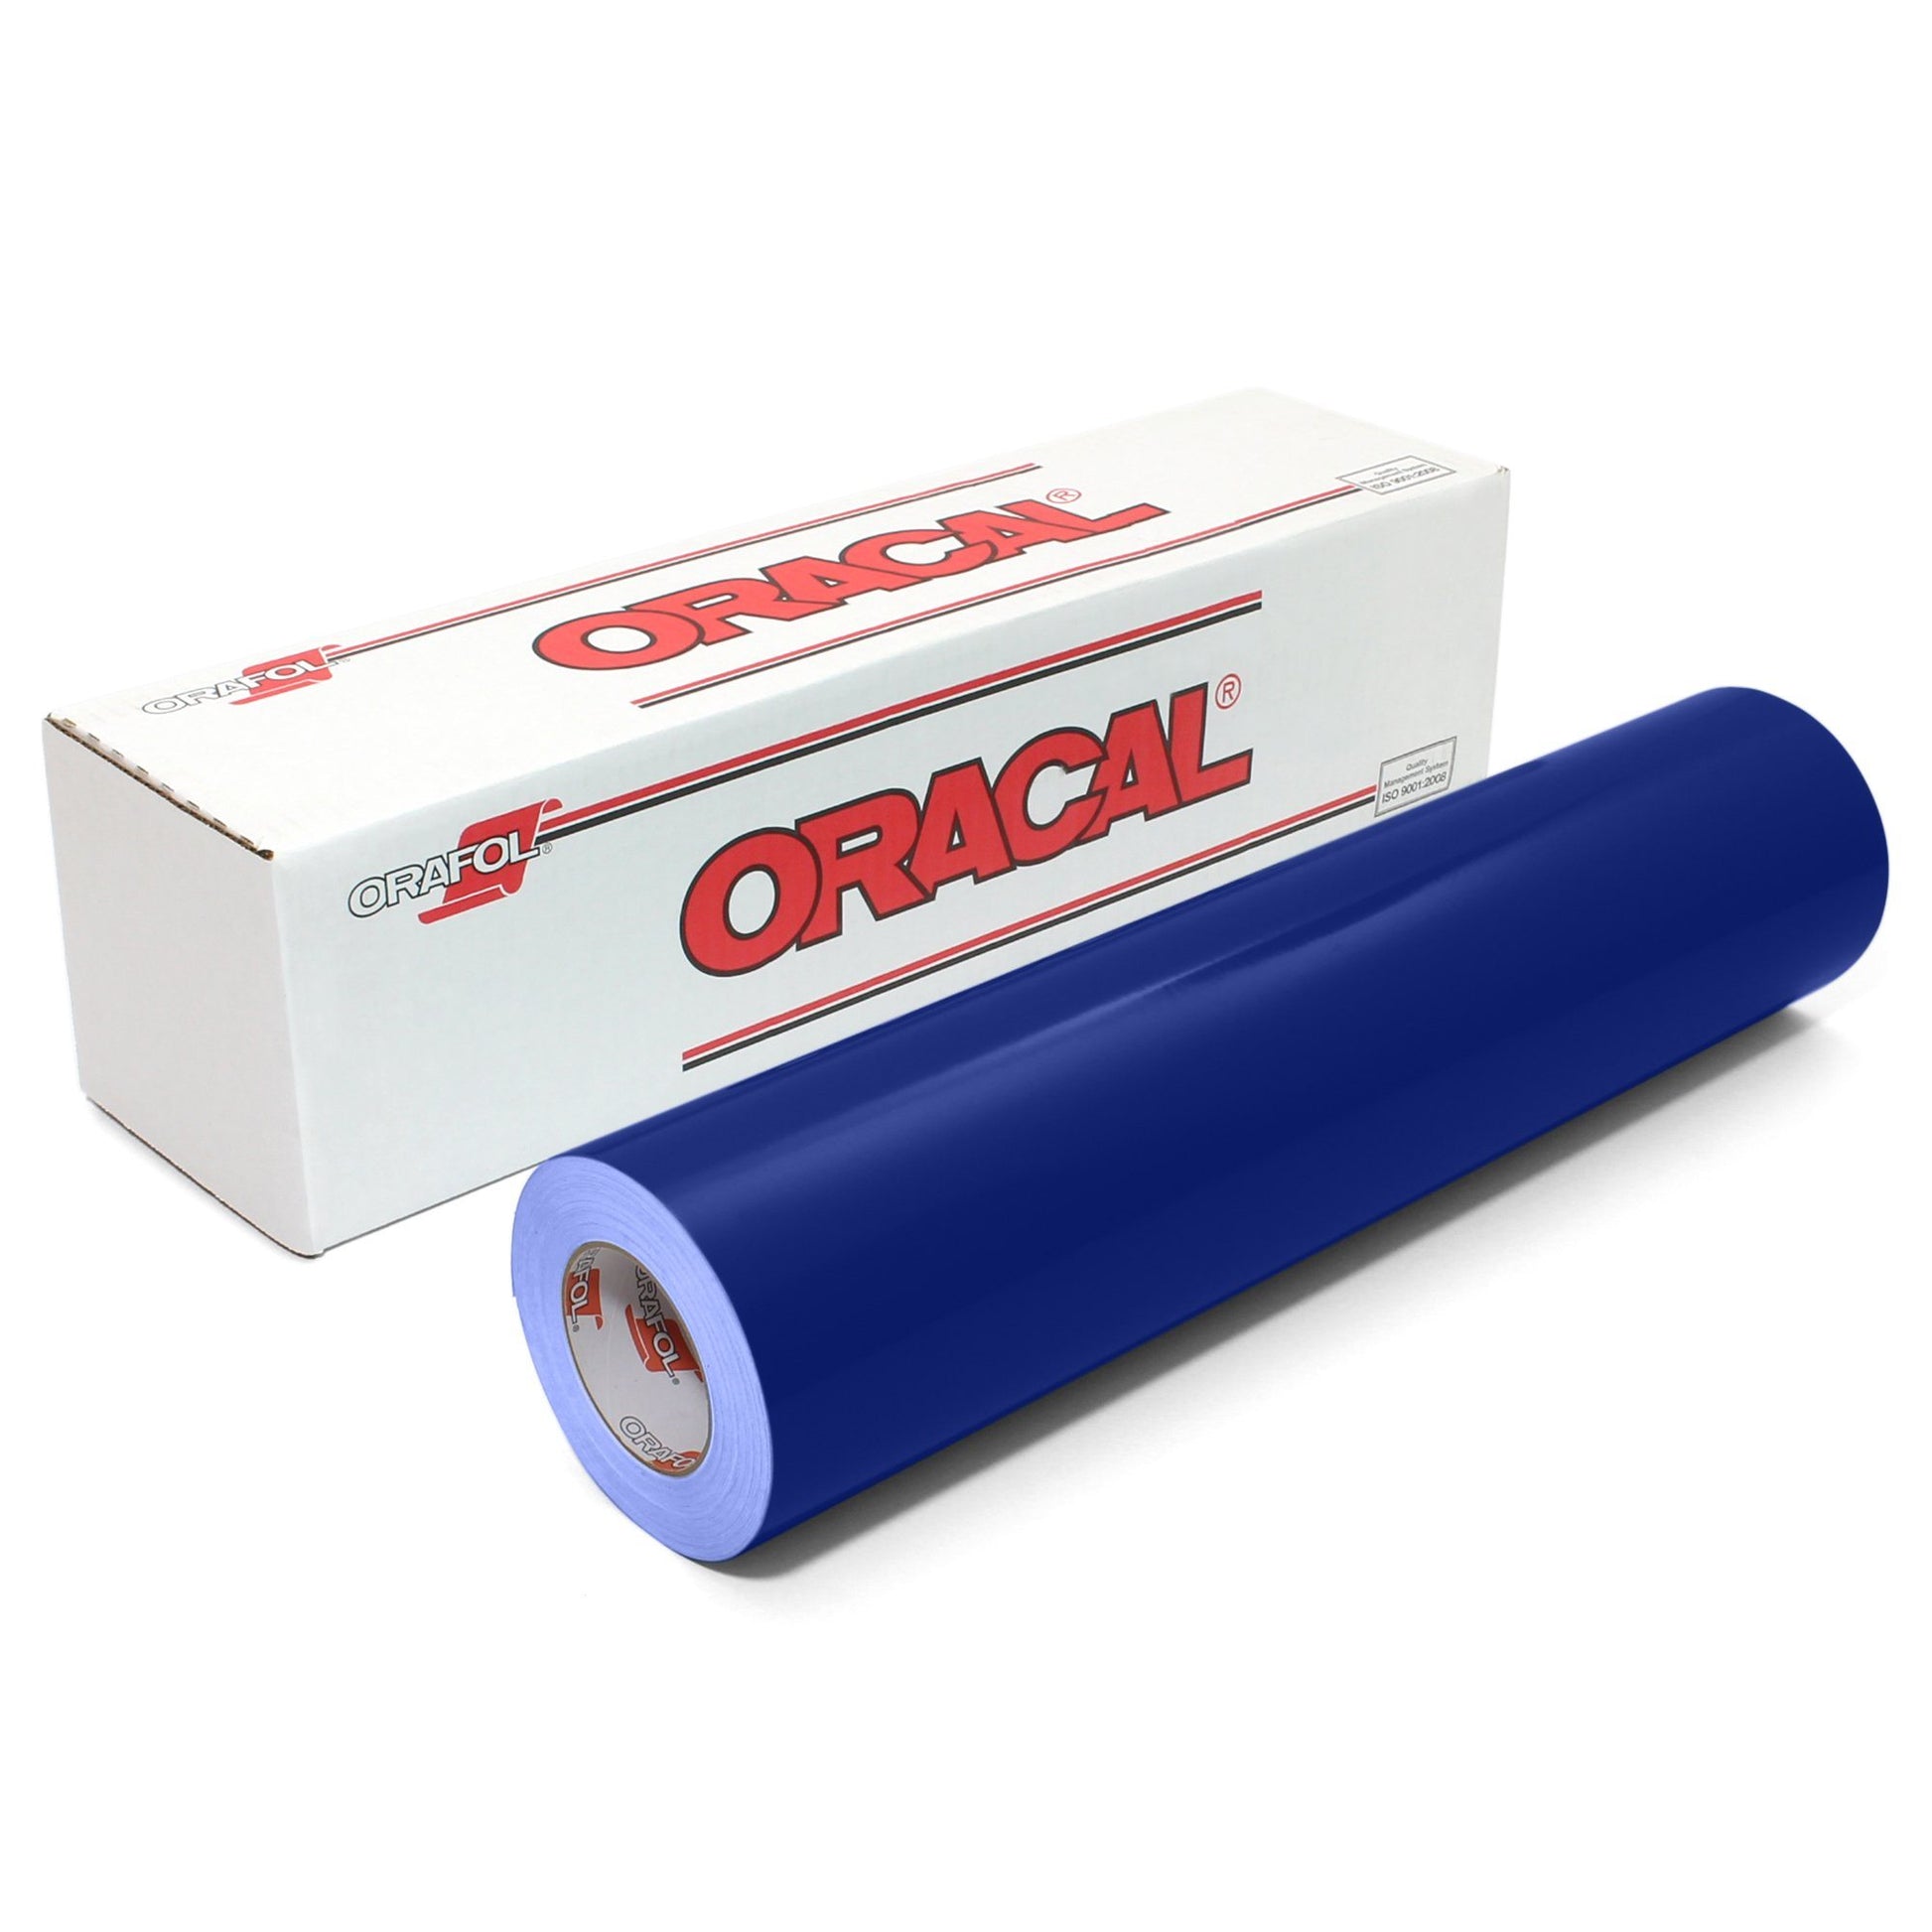 Oracal 651 12 x 60 (5 FT) (colors)-O6515FTC